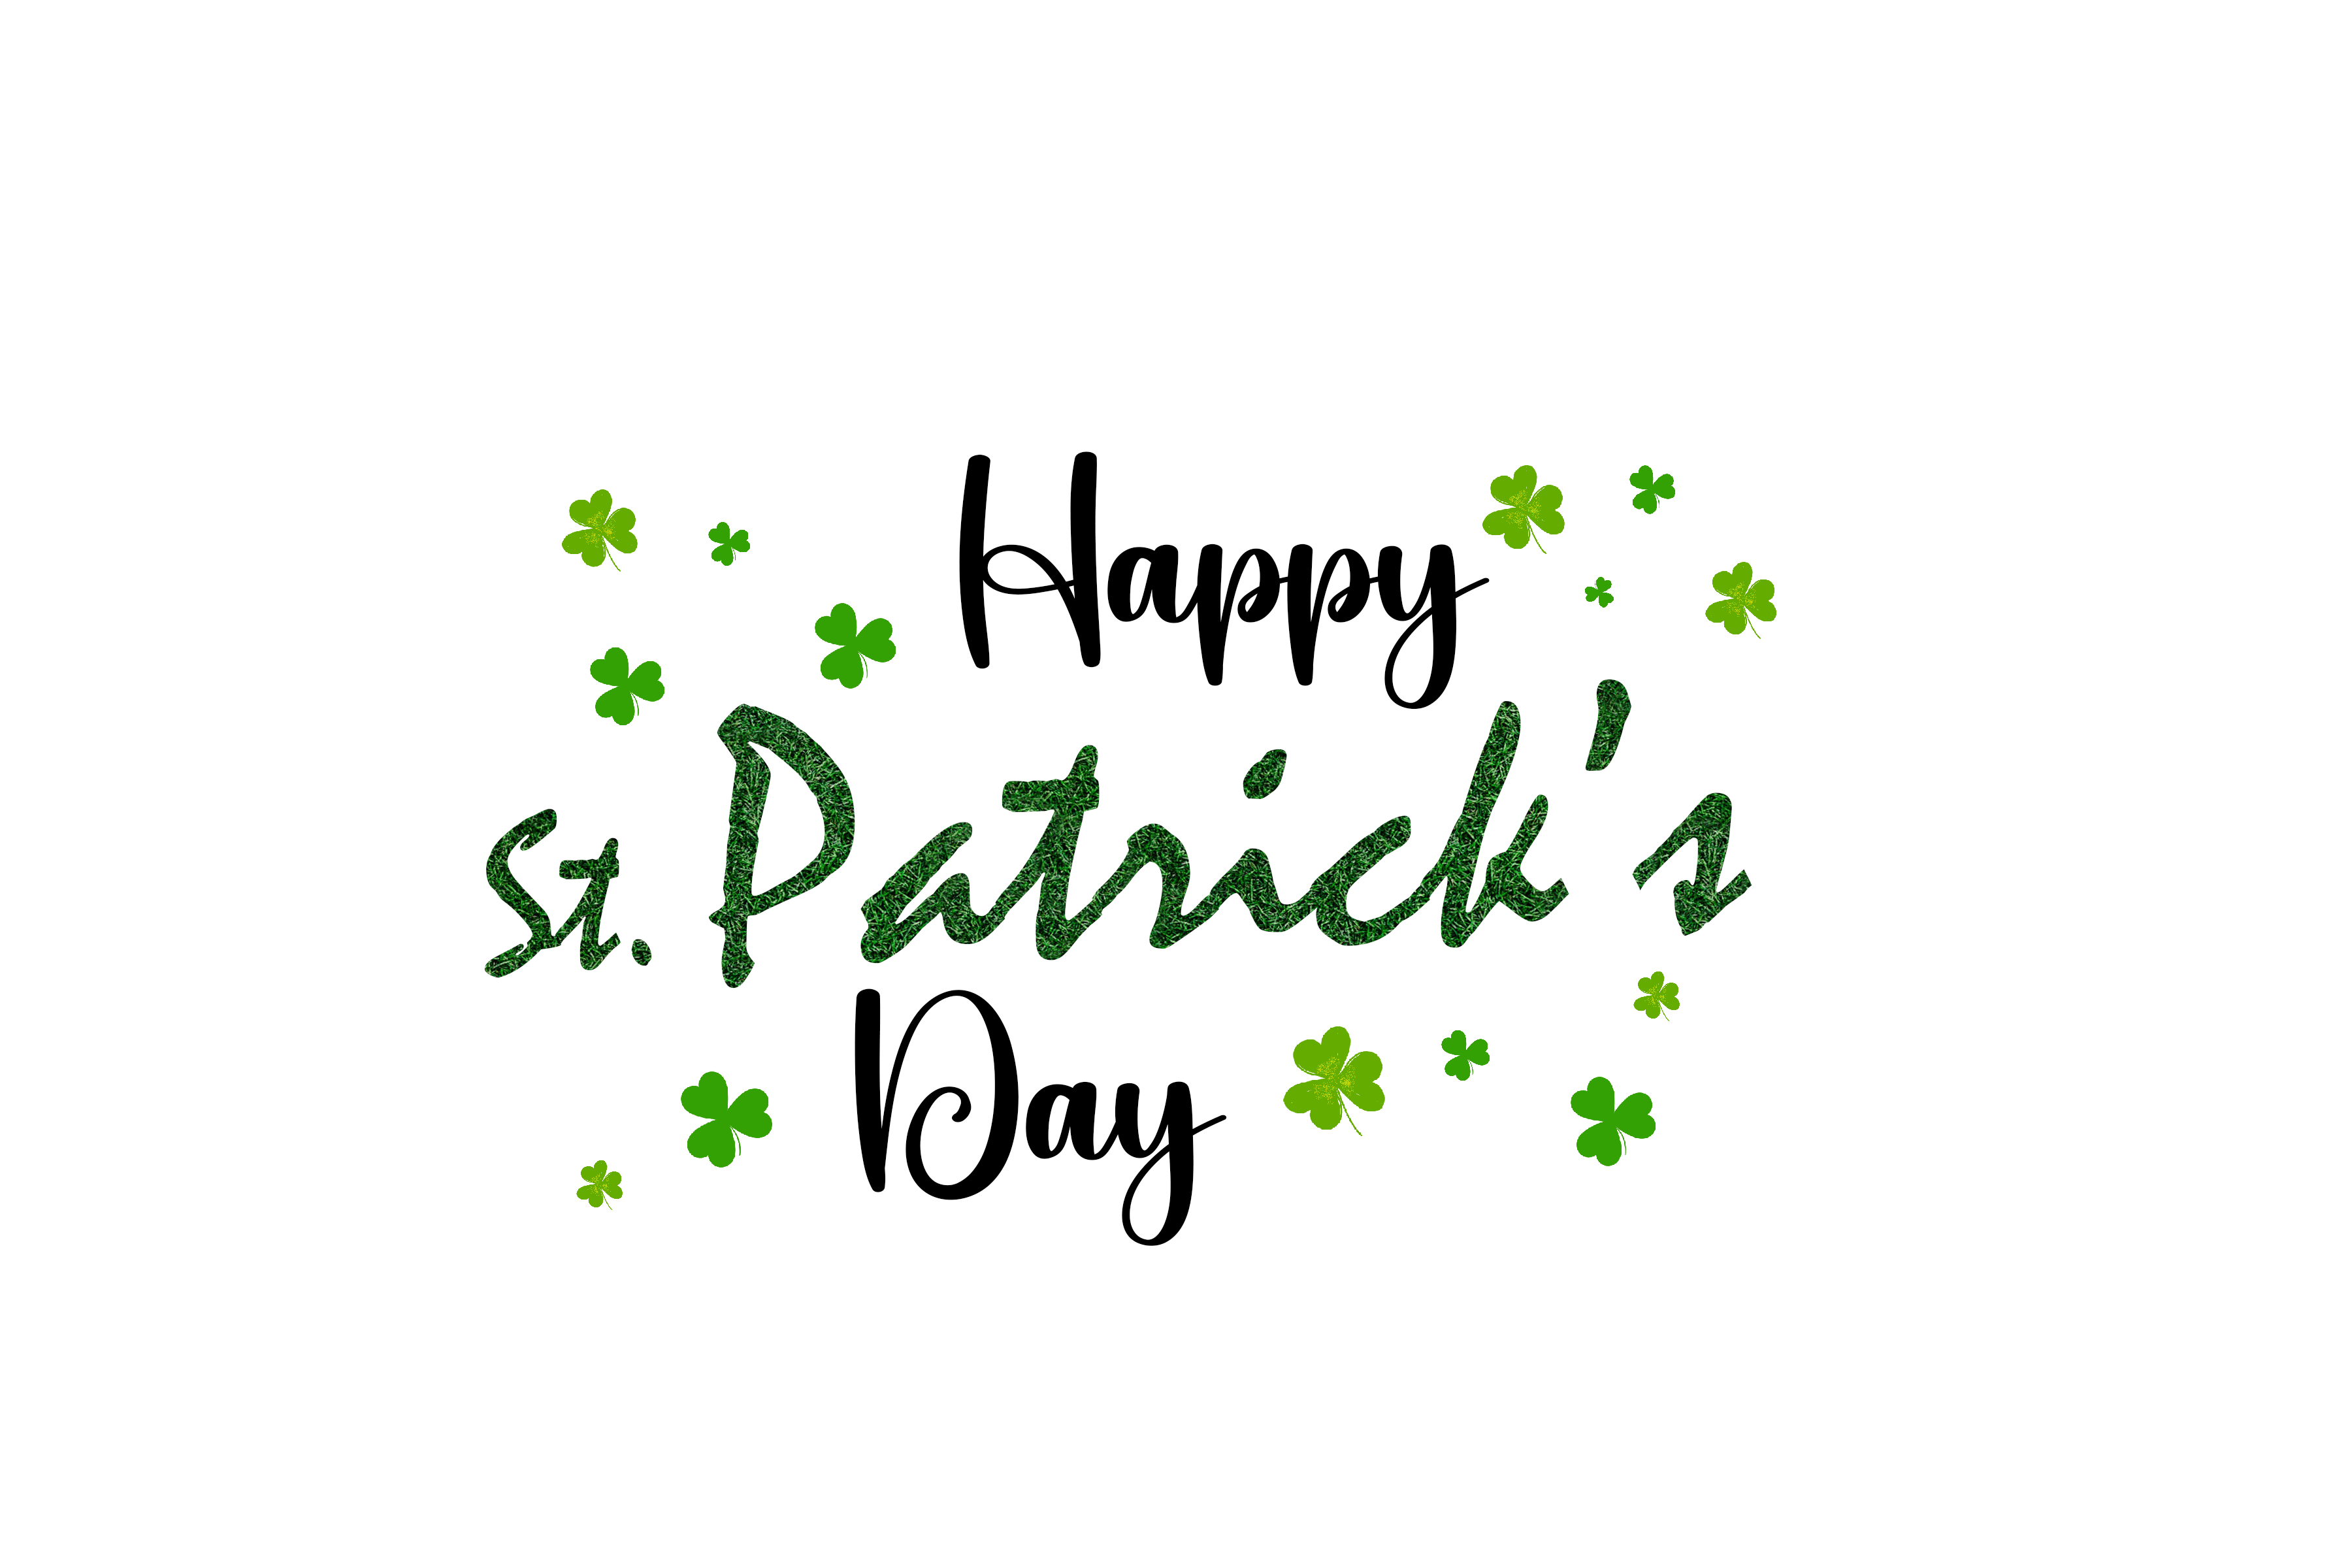 Happy St. Patricks day wishes PNG